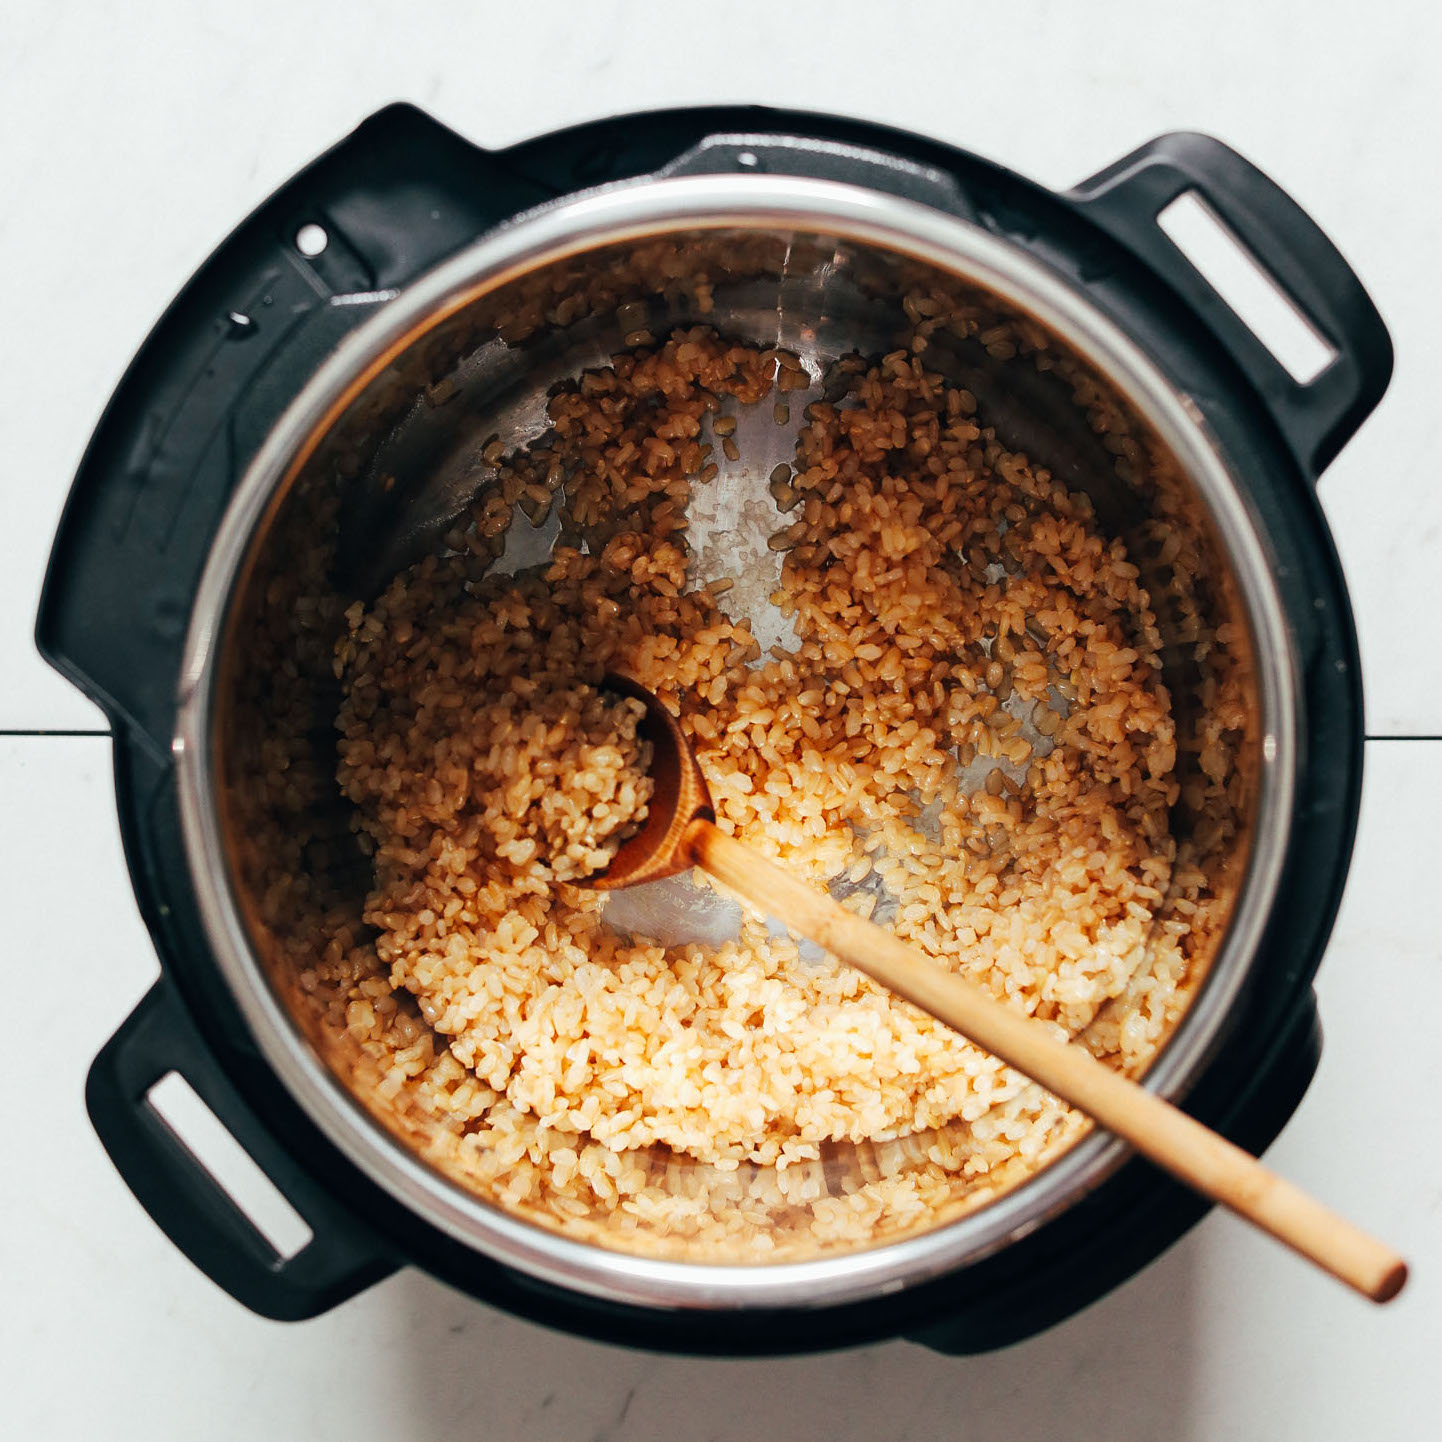 Instant pot filled with brown rice and water